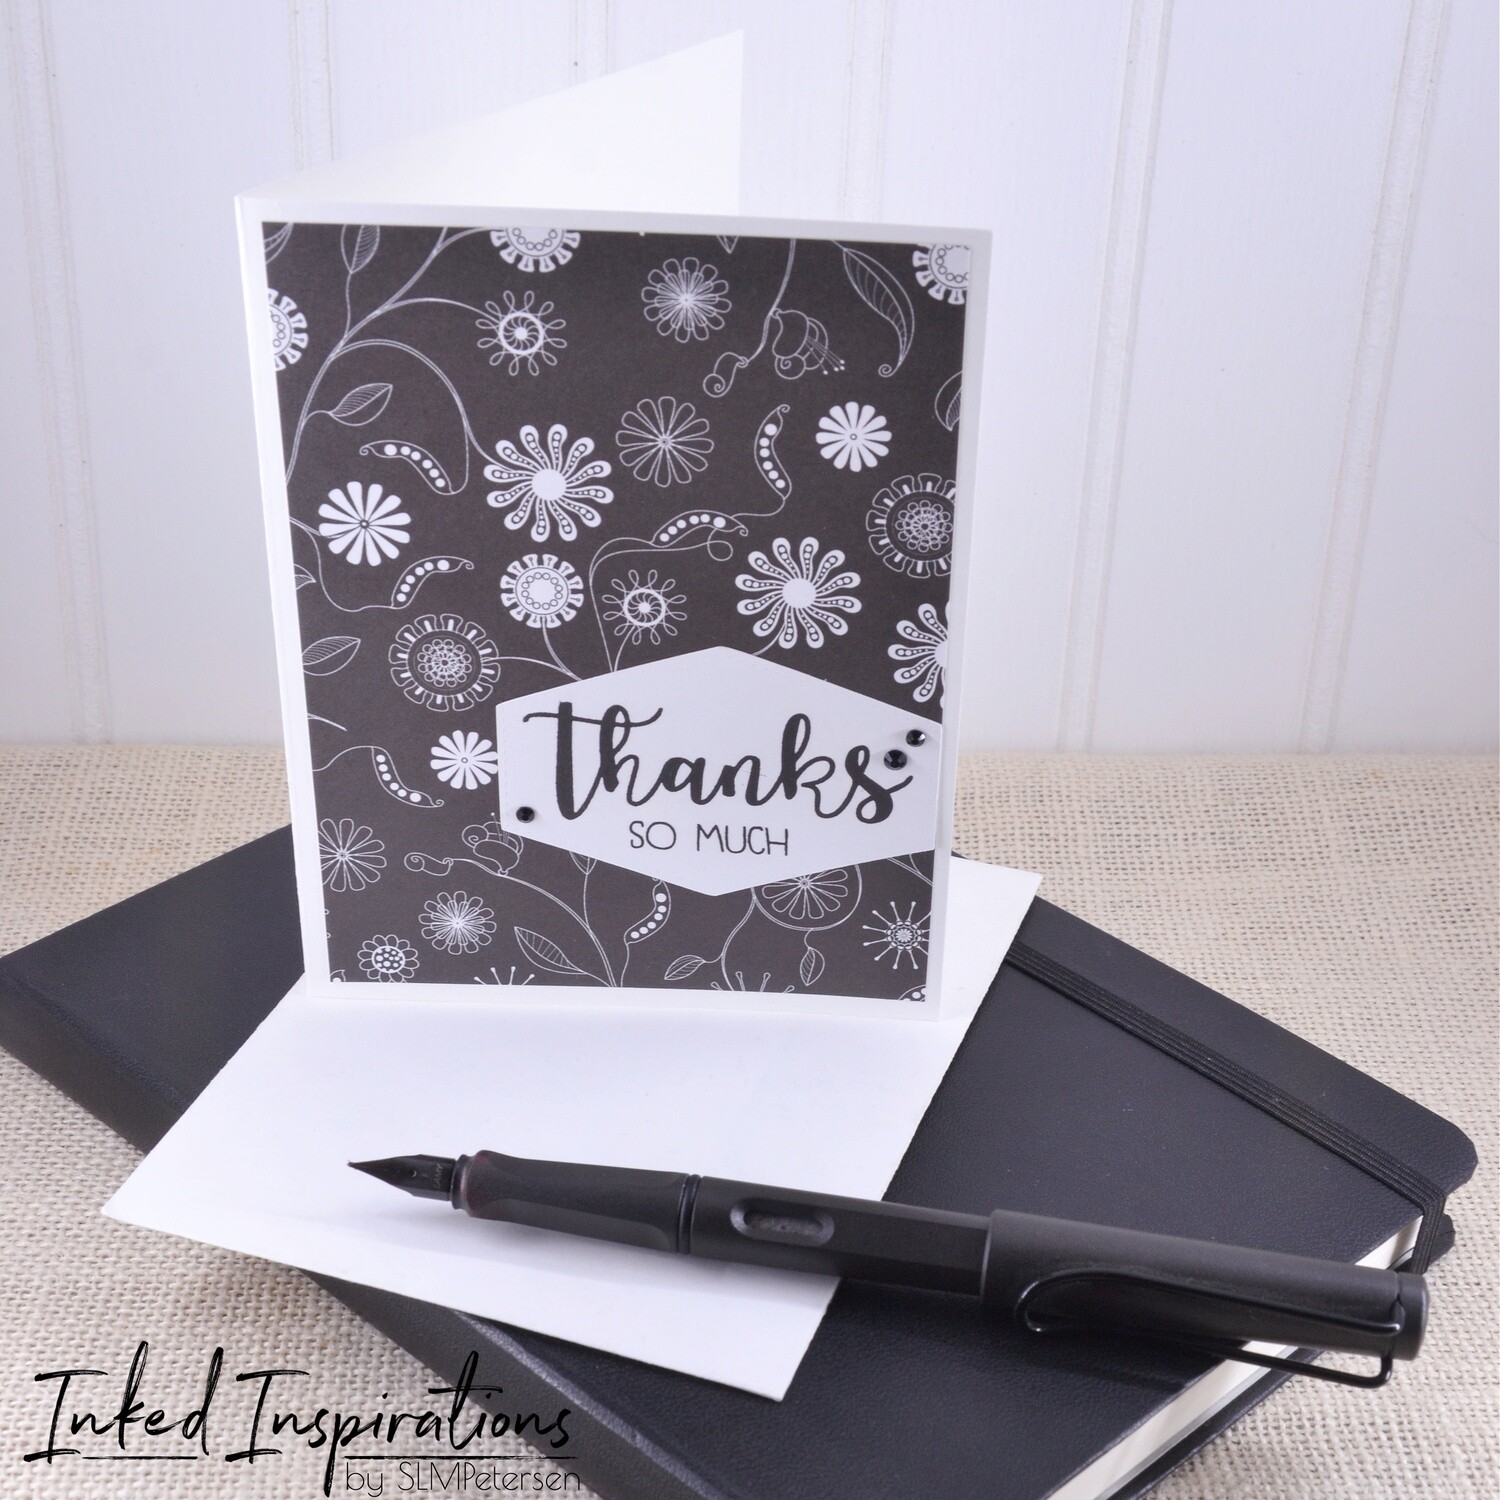 Thanks So Much - Black & White Floral